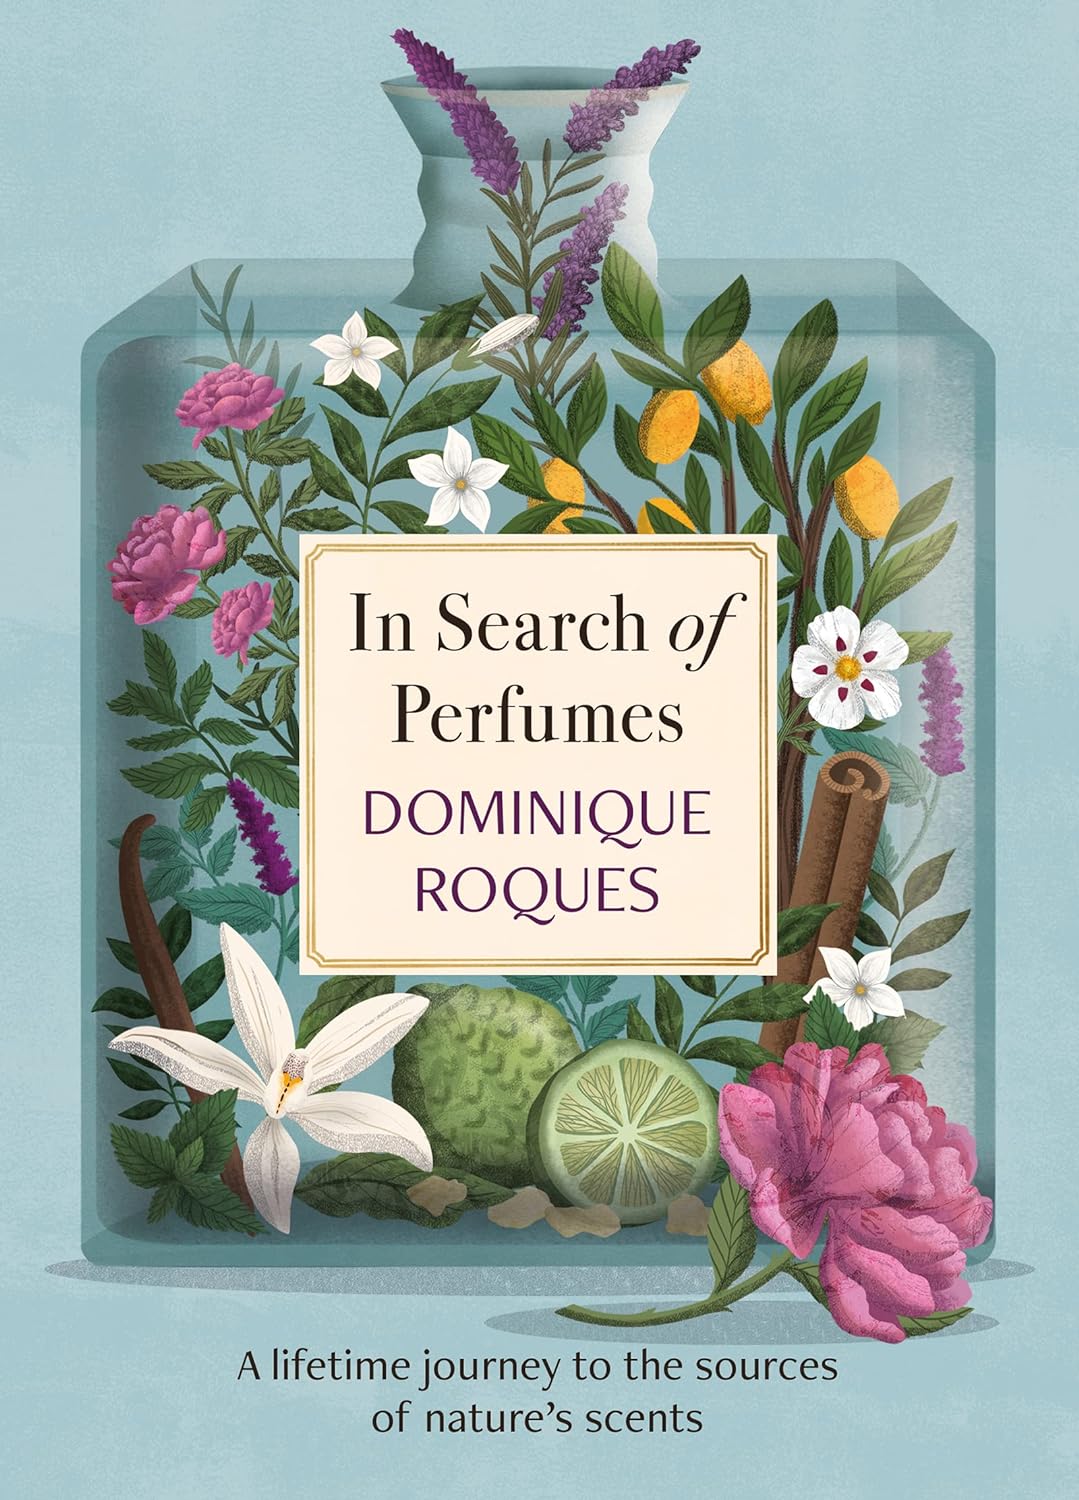 Publisher Welbeck - In Search of Perfumes(A lifetime journey to the sources of nature's scents) - Dominique Roques, Stephanie Smee